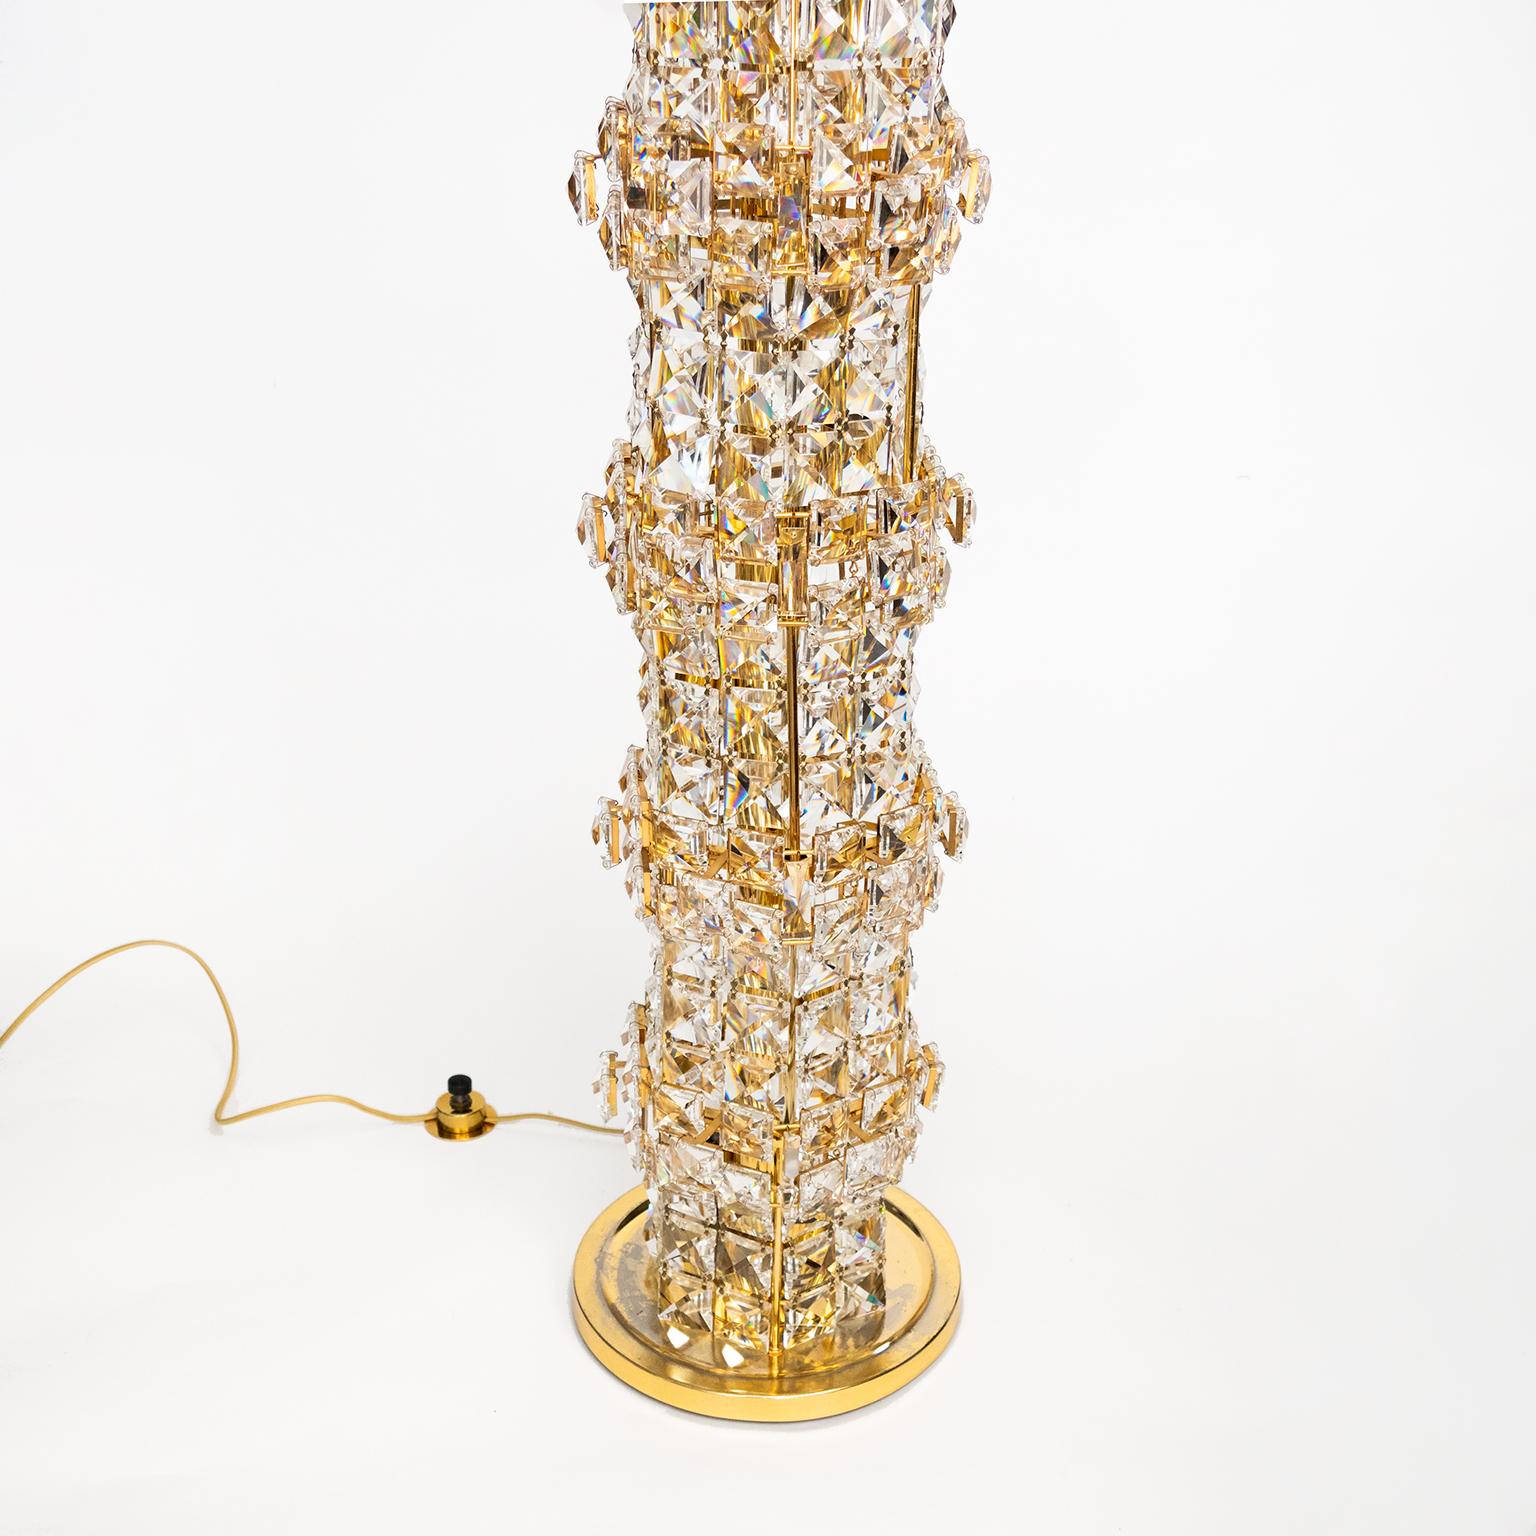 German Palwa Crystal and Gilded Brass Tower Floor Lamp, 1960s